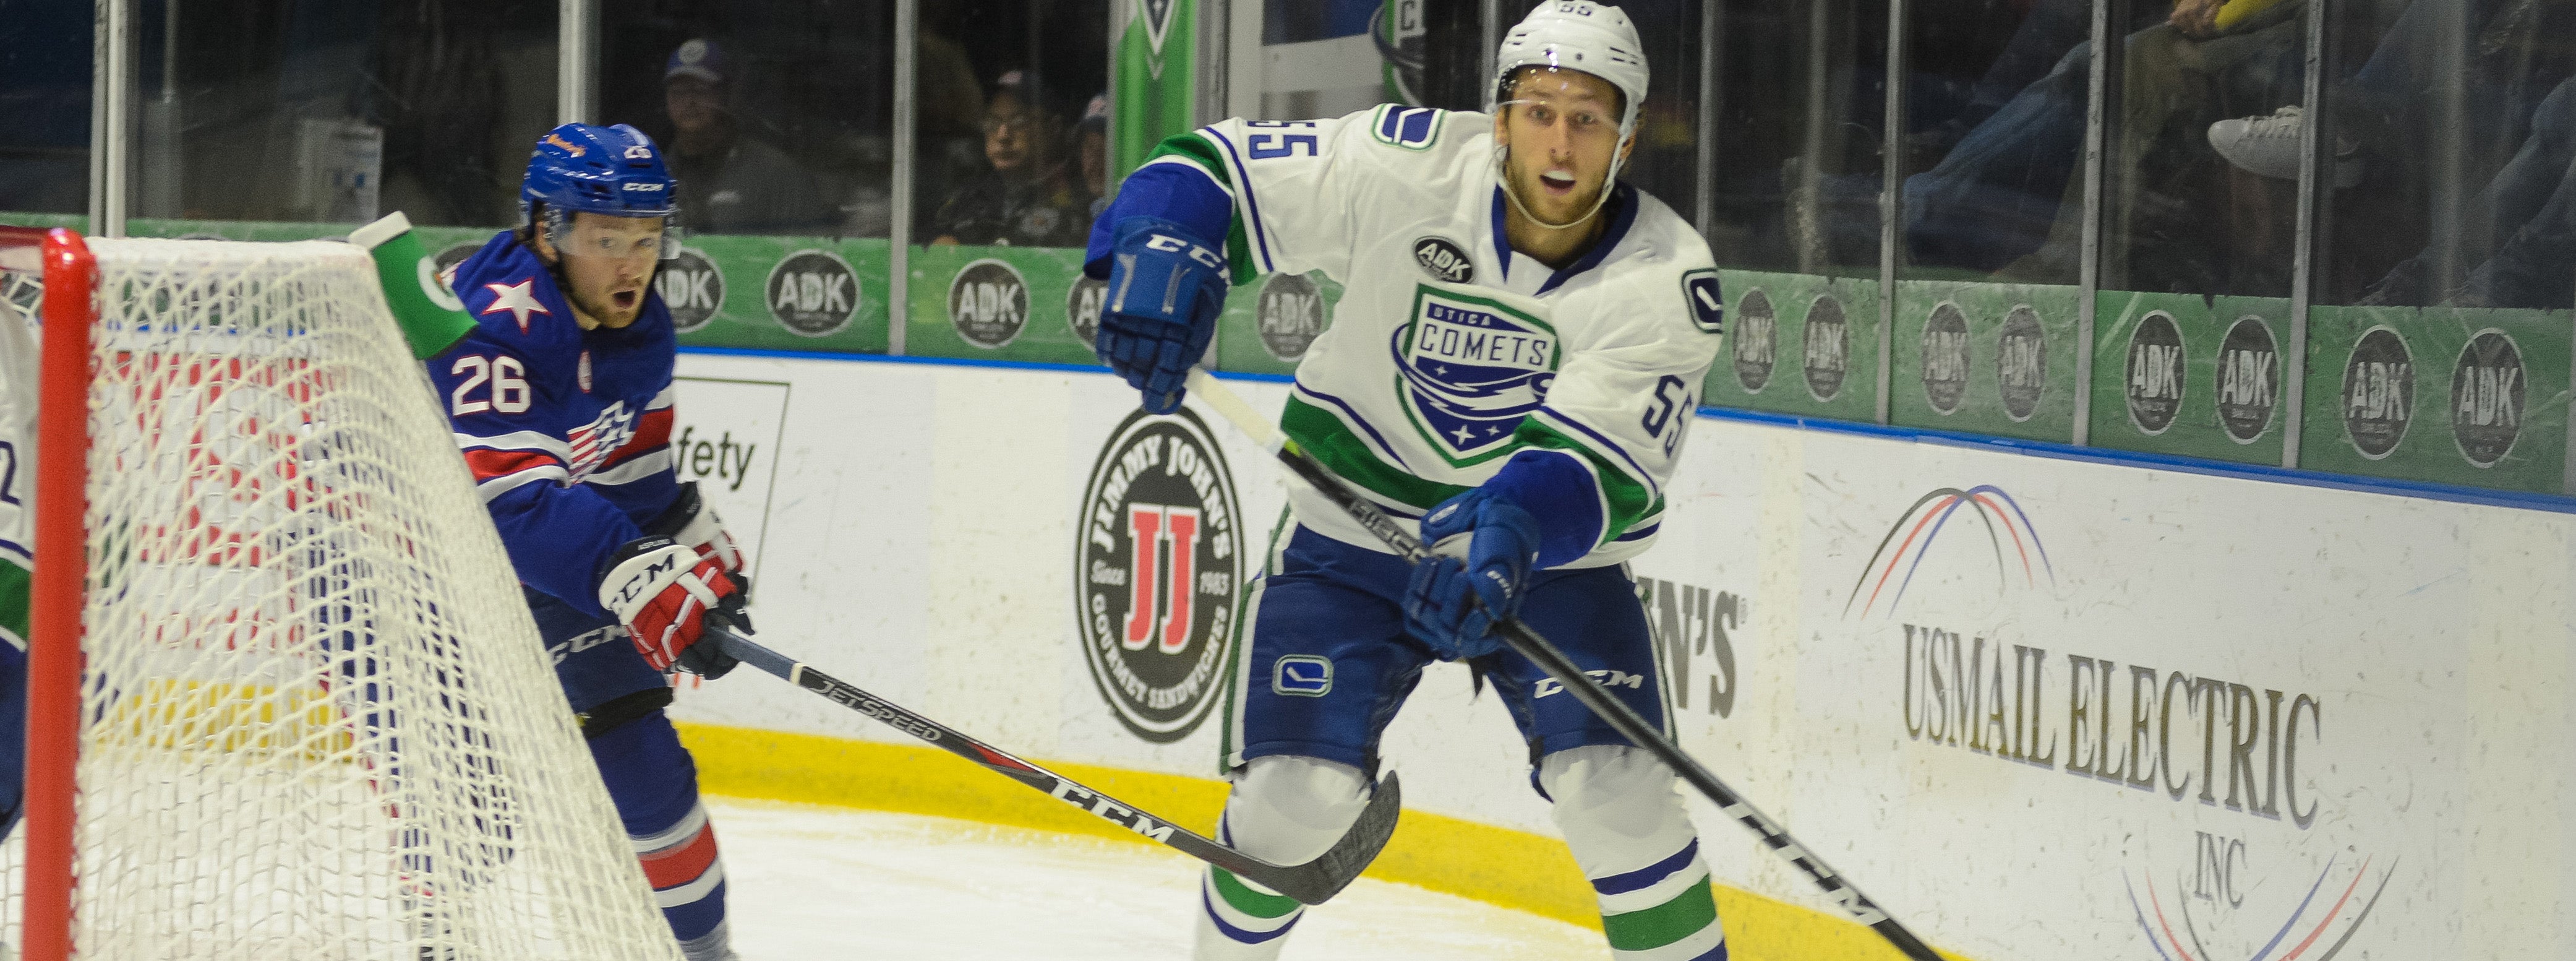 COMETS BATTLE AMERKS IN BLACK FRIDAY SPECIAL